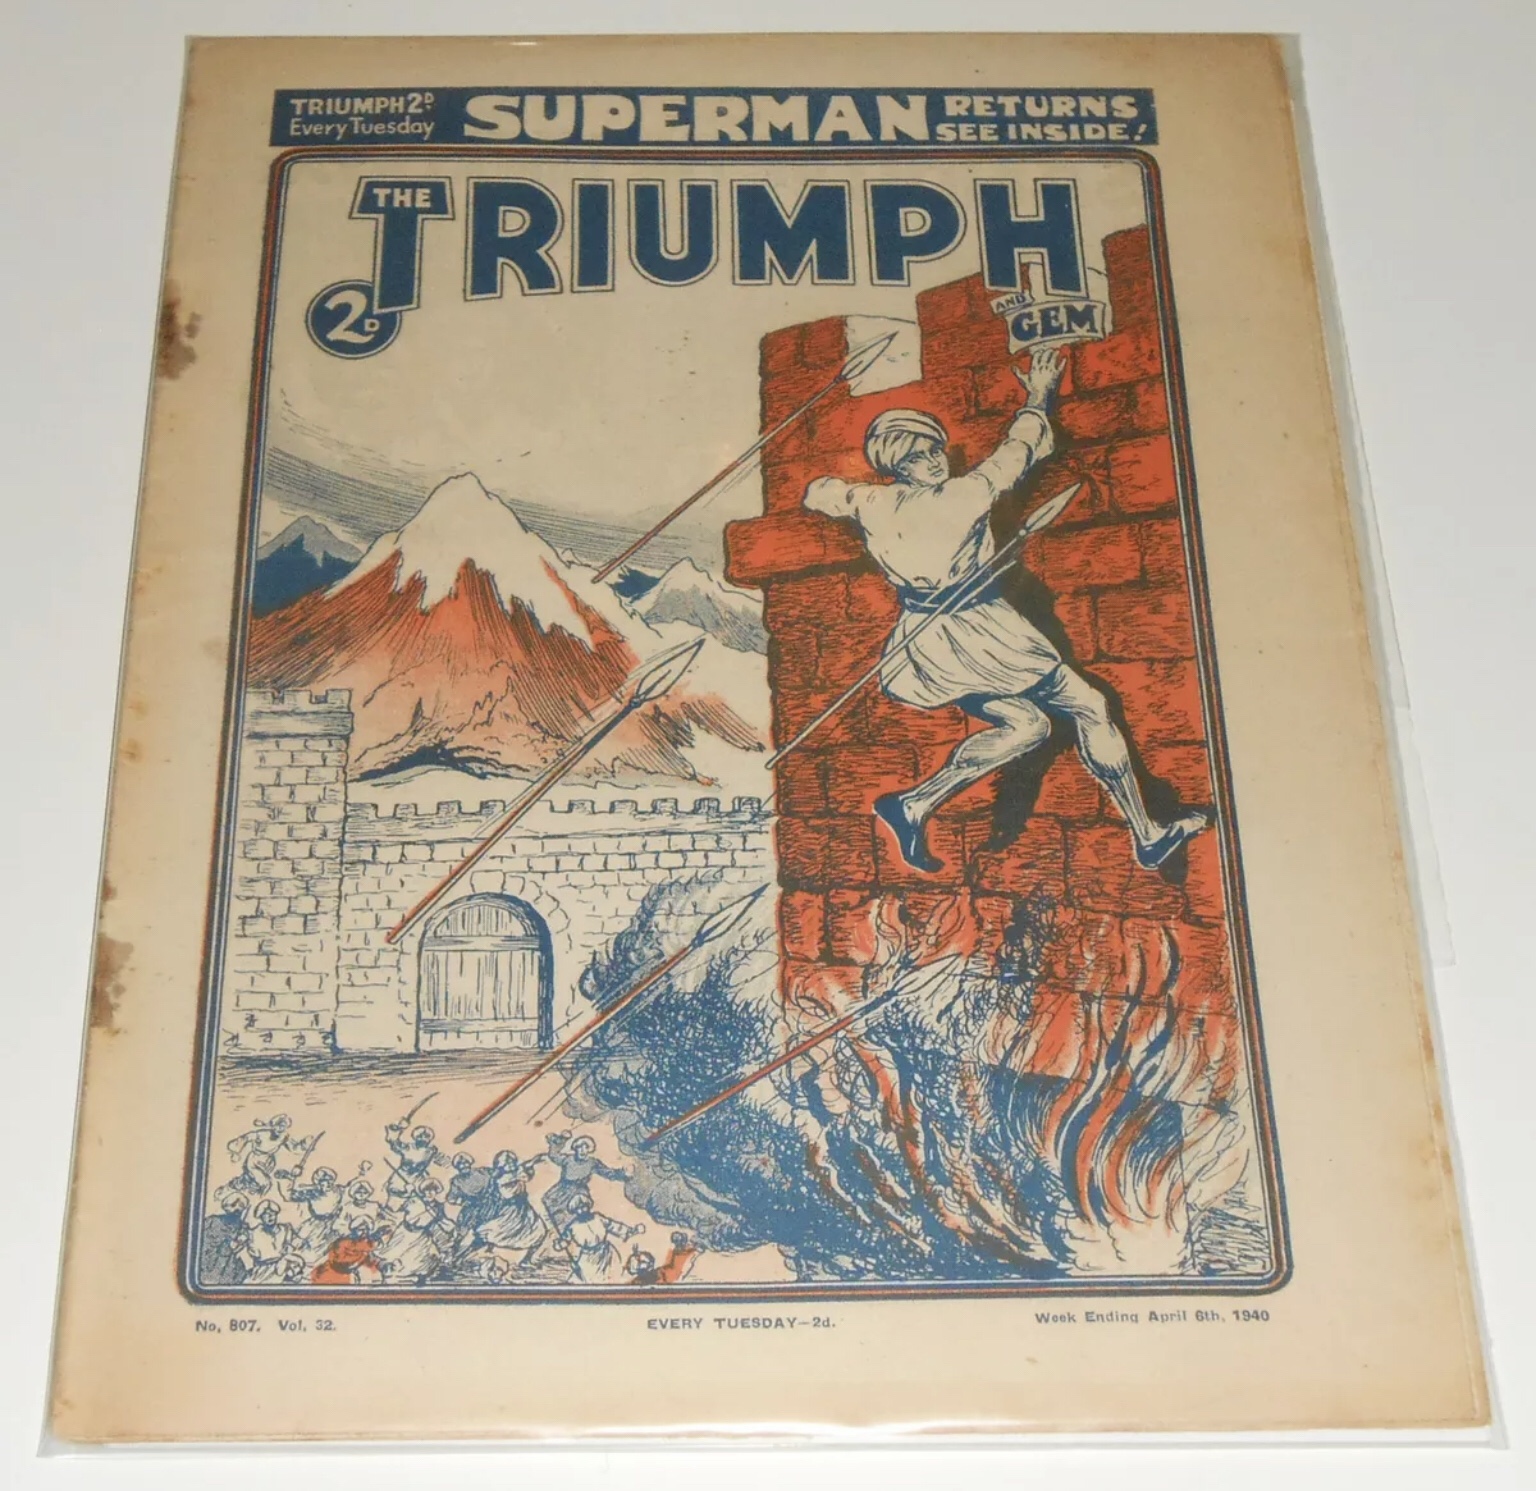 Triumph and The Gem No. 807, cover dated 6th April 1940